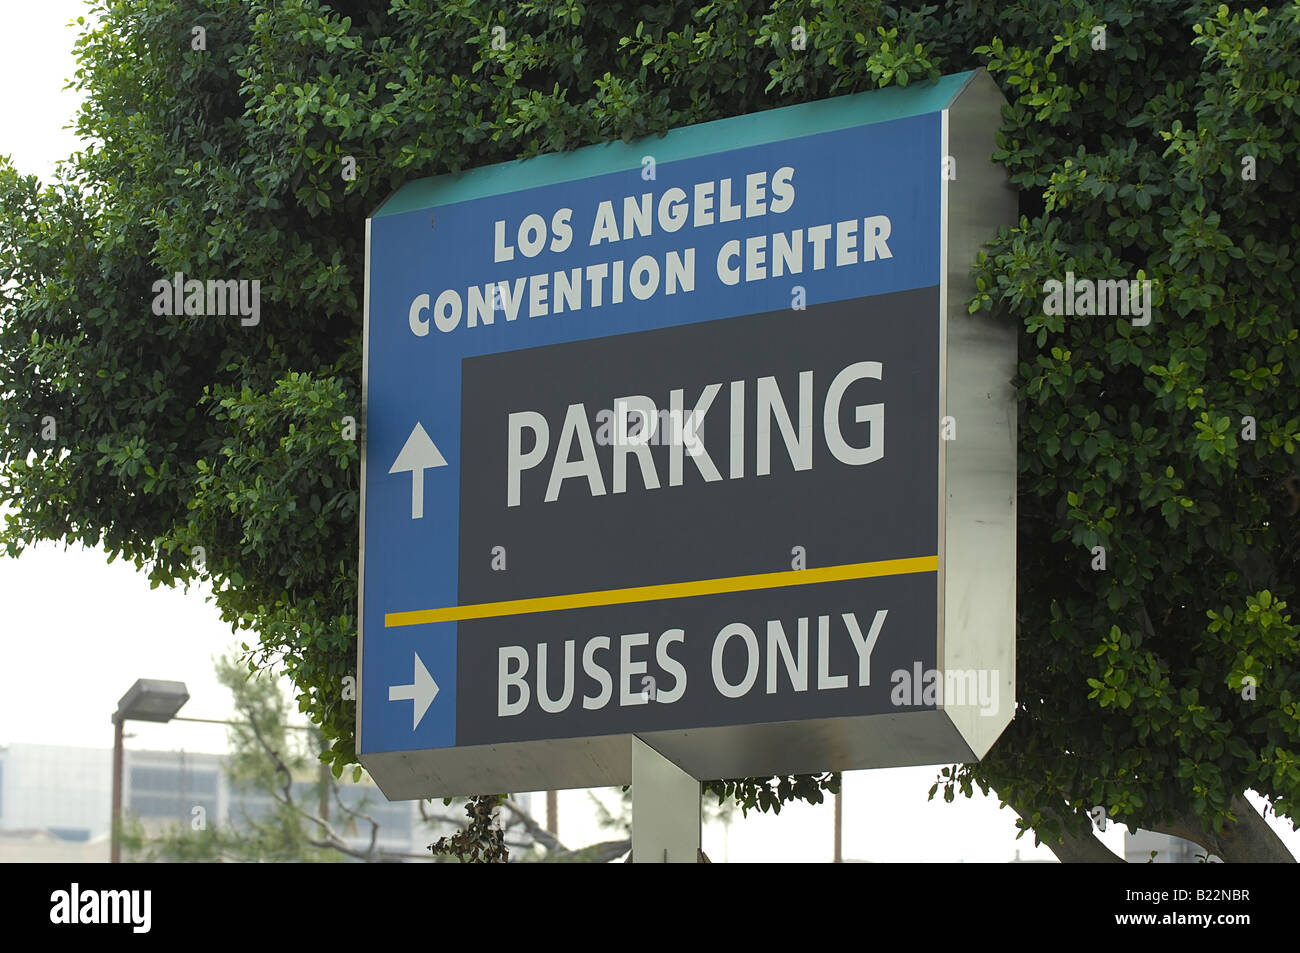 Los Angeles convention center parking. Stock Photo